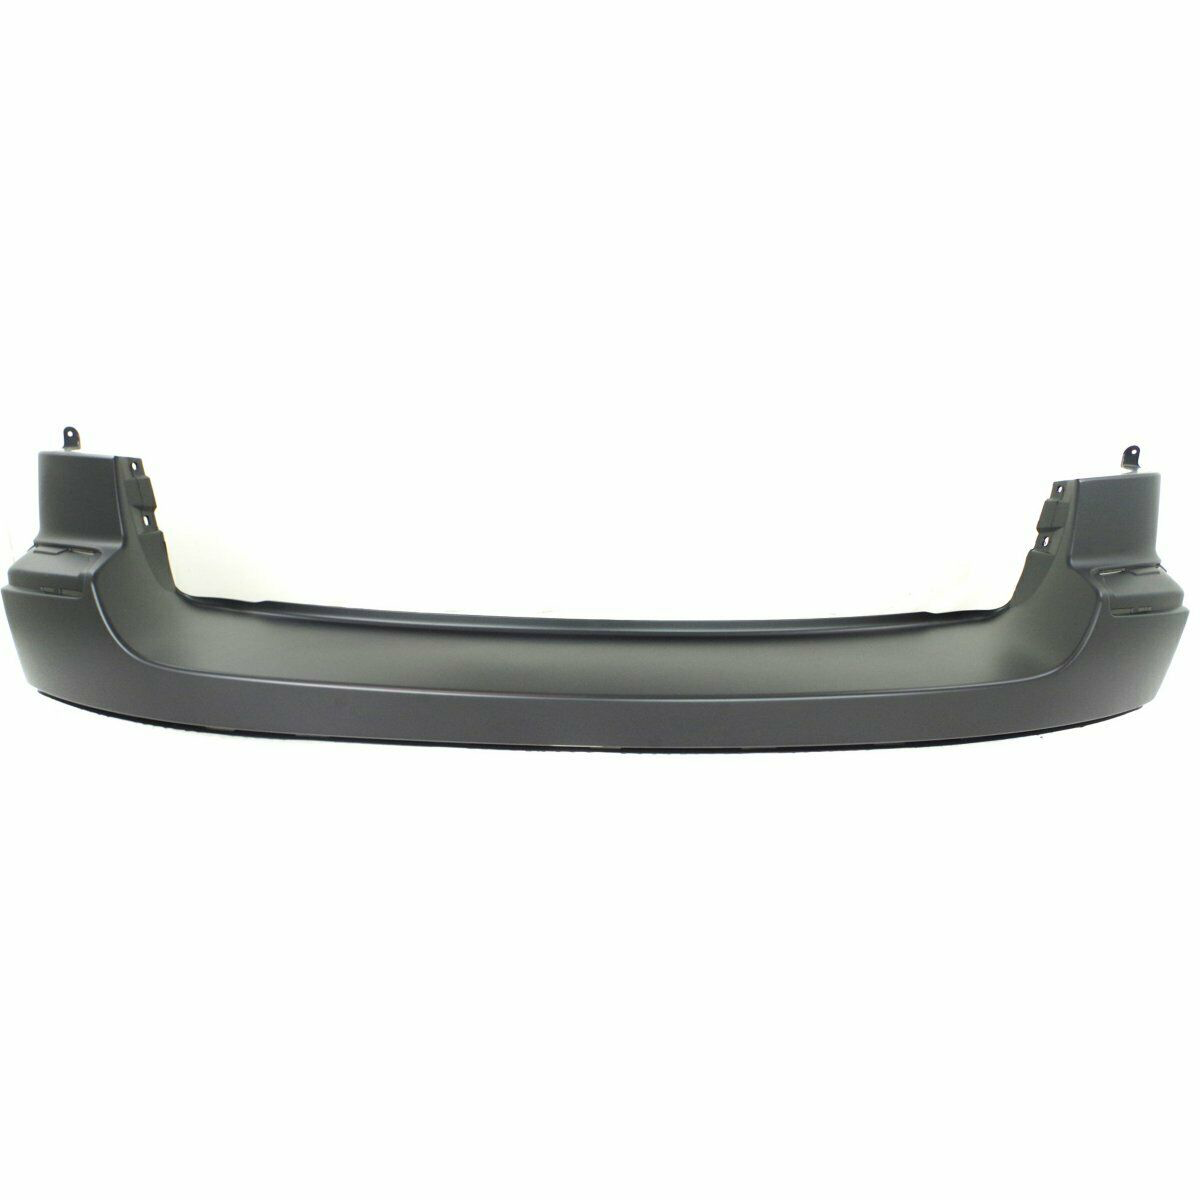 2004-2005 Chrysler Pacifica w/o Sensors Rear Bumper Painted to Match